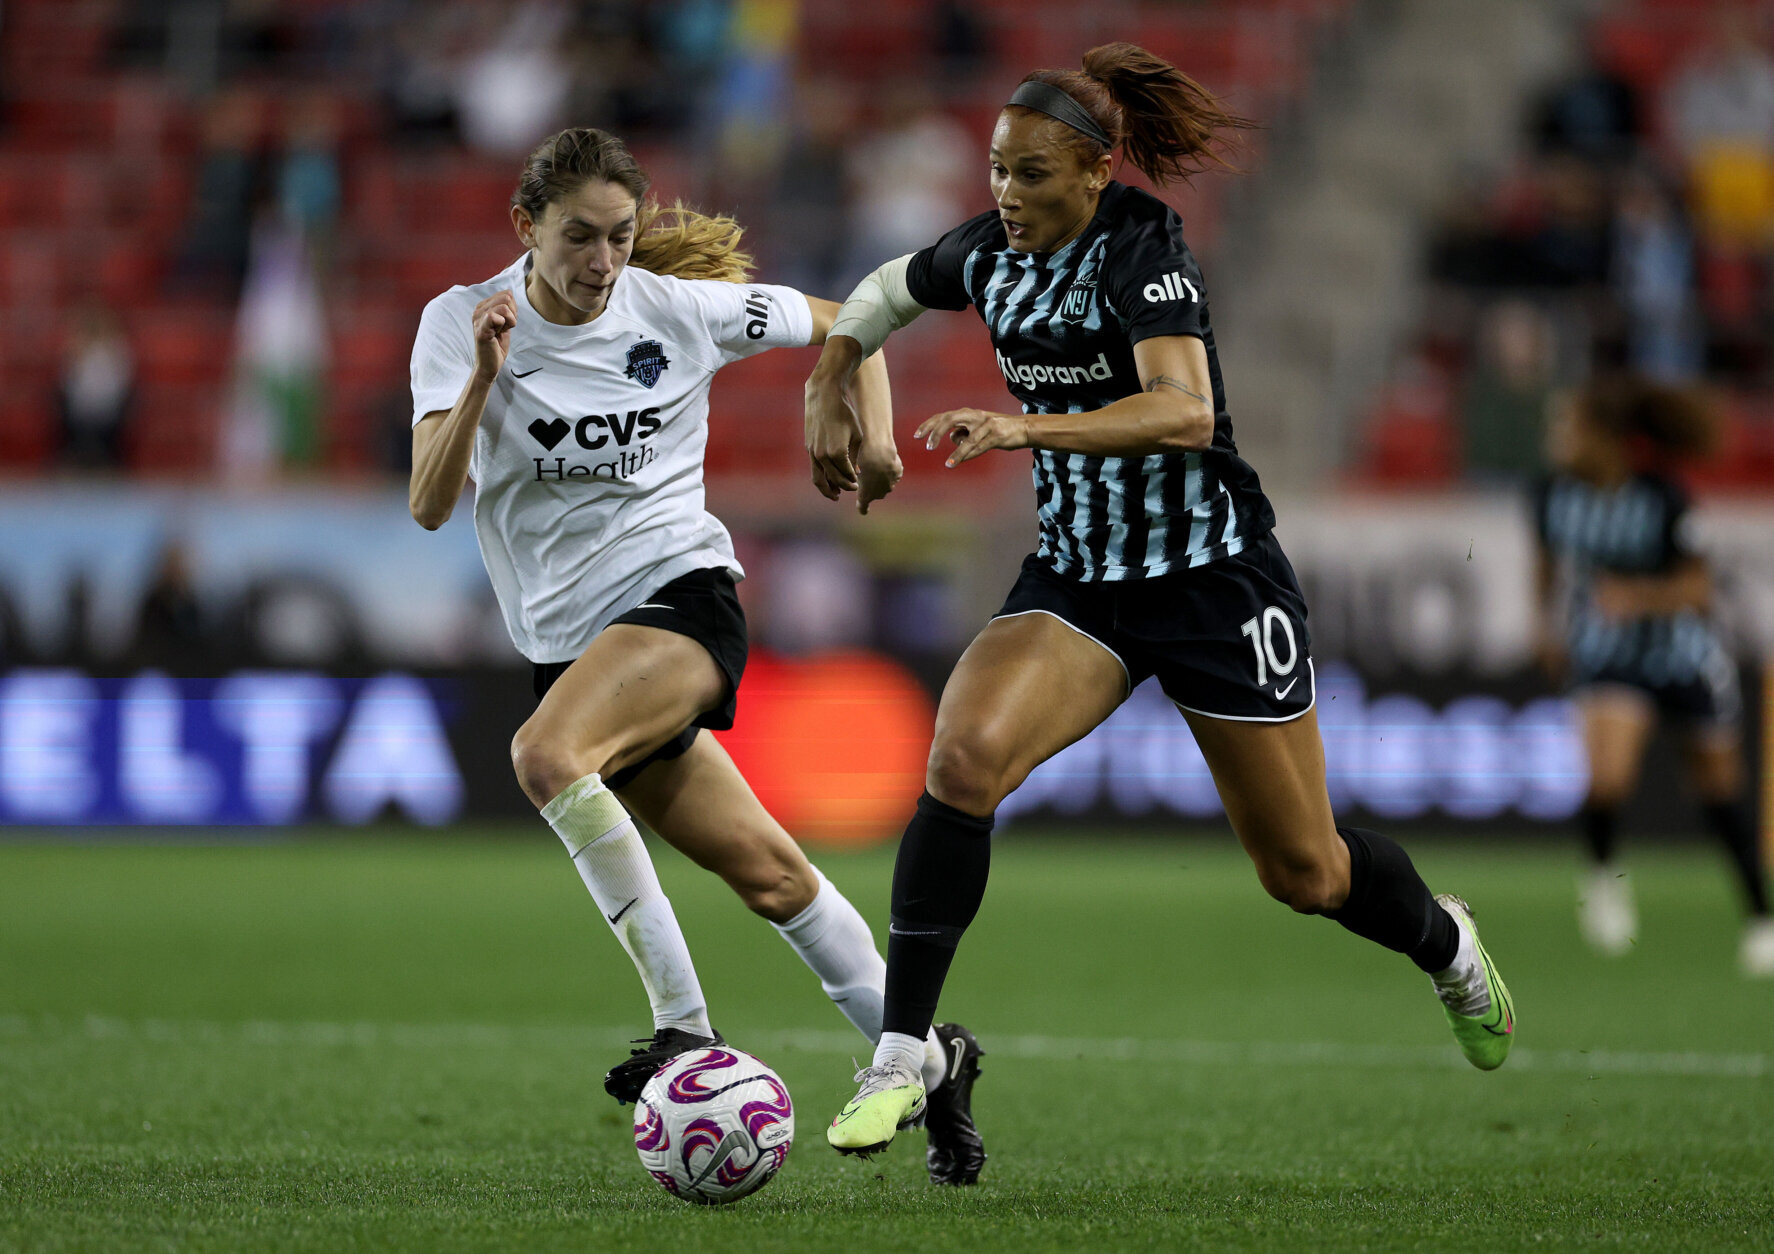 HARRISON, NEW JERSEY - APRIL 19: Paige Metayer #26 of the Washington Spirit and Lynn Williams #10 of the NJ/NY Gotham FC go after the ball during the first half of the 2023 NWSL Challenge Cup match at Red Bull Arena on April 19, 2023 in Harrison, New Jersey. (Photo by Elsa/Getty Images)